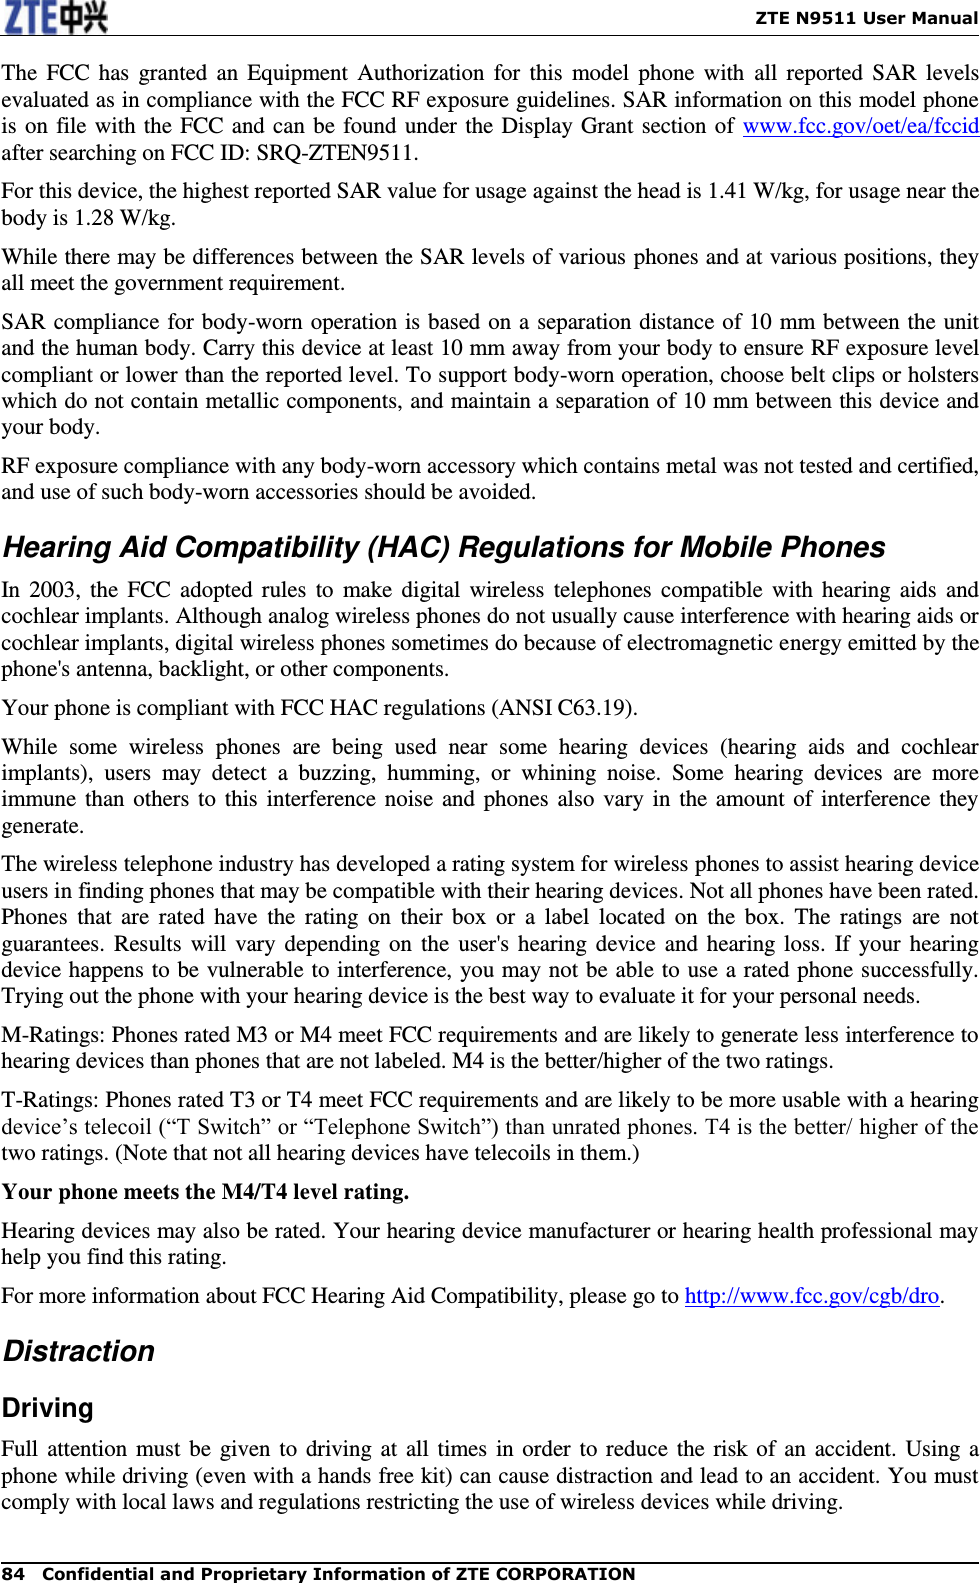    ZTE N9511 User Manual 84  Confidential and Proprietary Information of ZTE CORPORATION The  FCC  has  granted  an  Equipment  Authorization for  this  model  phone  with  all reported  SAR  levels evaluated as in compliance with the FCC RF exposure guidelines. SAR information on this model phone is on file with the FCC and can be found under the Display Grant section of  www.fcc.gov/oet/ea/fccid after searching on FCC ID: SRQ-ZTEN9511. For this device, the highest reported SAR value for usage against the head is 1.41 W/kg, for usage near the body is 1.28 W/kg. While there may be differences between the SAR levels of various phones and at various positions, they all meet the government requirement. SAR compliance for body-worn operation is based on a separation distance of 10 mm between the unit and the human body. Carry this device at least 10 mm away from your body to ensure RF exposure level compliant or lower than the reported level. To support body-worn operation, choose belt clips or holsters which do not contain metallic components, and maintain a separation of 10 mm between this device and your body.   RF exposure compliance with any body-worn accessory which contains metal was not tested and certified, and use of such body-worn accessories should be avoided. Hearing Aid Compatibility (HAC) Regulations for Mobile Phones In 2003,  the  FCC  adopted  rules  to  make digital  wireless  telephones  compatible  with  hearing  aids and cochlear implants. Although analog wireless phones do not usually cause interference with hearing aids or cochlear implants, digital wireless phones sometimes do because of electromagnetic energy emitted by the phone&apos;s antenna, backlight, or other components. Your phone is compliant with FCC HAC regulations (ANSI C63.19). While  some  wireless  phones  are  being  used  near  some  hearing  devices  (hearing  aids  and  cochlear implants),  users  may  detect  a  buzzing,  humming,  or  whining  noise.  Some  hearing  devices  are  more immune than  others to this interference noise and phones also  vary in  the  amount of  interference they generate. The wireless telephone industry has developed a rating system for wireless phones to assist hearing device users in finding phones that may be compatible with their hearing devices. Not all phones have been rated. Phones  that  are  rated  have  the  rating  on  their  box  or  a  label  located  on  the  box.  The  ratings  are  not guarantees. Results will vary  depending on  the  user&apos;s hearing device  and hearing loss. If your  hearing device happens to be vulnerable to interference, you may not be able to use a rated phone successfully. Trying out the phone with your hearing device is the best way to evaluate it for your personal needs. M-Ratings: Phones rated M3 or M4 meet FCC requirements and are likely to generate less interference to hearing devices than phones that are not labeled. M4 is the better/higher of the two ratings. T-Ratings: Phones rated T3 or T4 meet FCC requirements and are likely to be more usable with a hearing device’s telecoil (“T Switch” or “Telephone Switch”) than unrated phones. T4 is the better/ higher of the two ratings. (Note that not all hearing devices have telecoils in them.) Your phone meets the M4/T4 level rating.   Hearing devices may also be rated. Your hearing device manufacturer or hearing health professional may help you find this rating. For more information about FCC Hearing Aid Compatibility, please go to http://www.fcc.gov/cgb/dro. Distraction Driving Full attention must be given to driving at  all times in order to reduce the risk of  an  accident. Using  a phone while driving (even with a hands free kit) can cause distraction and lead to an accident. You must comply with local laws and regulations restricting the use of wireless devices while driving. 